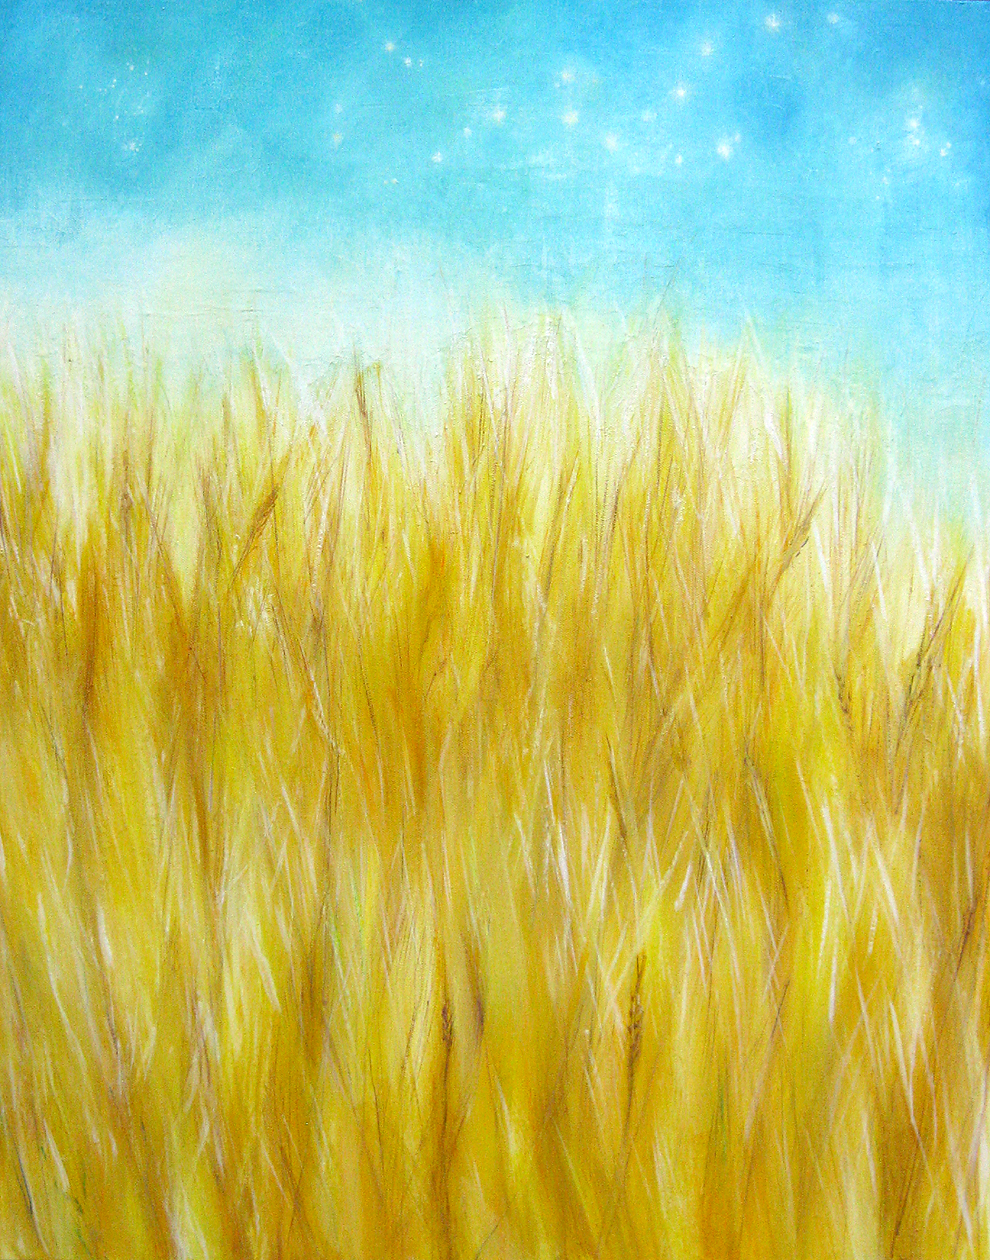 wheat and sparkling blue sky